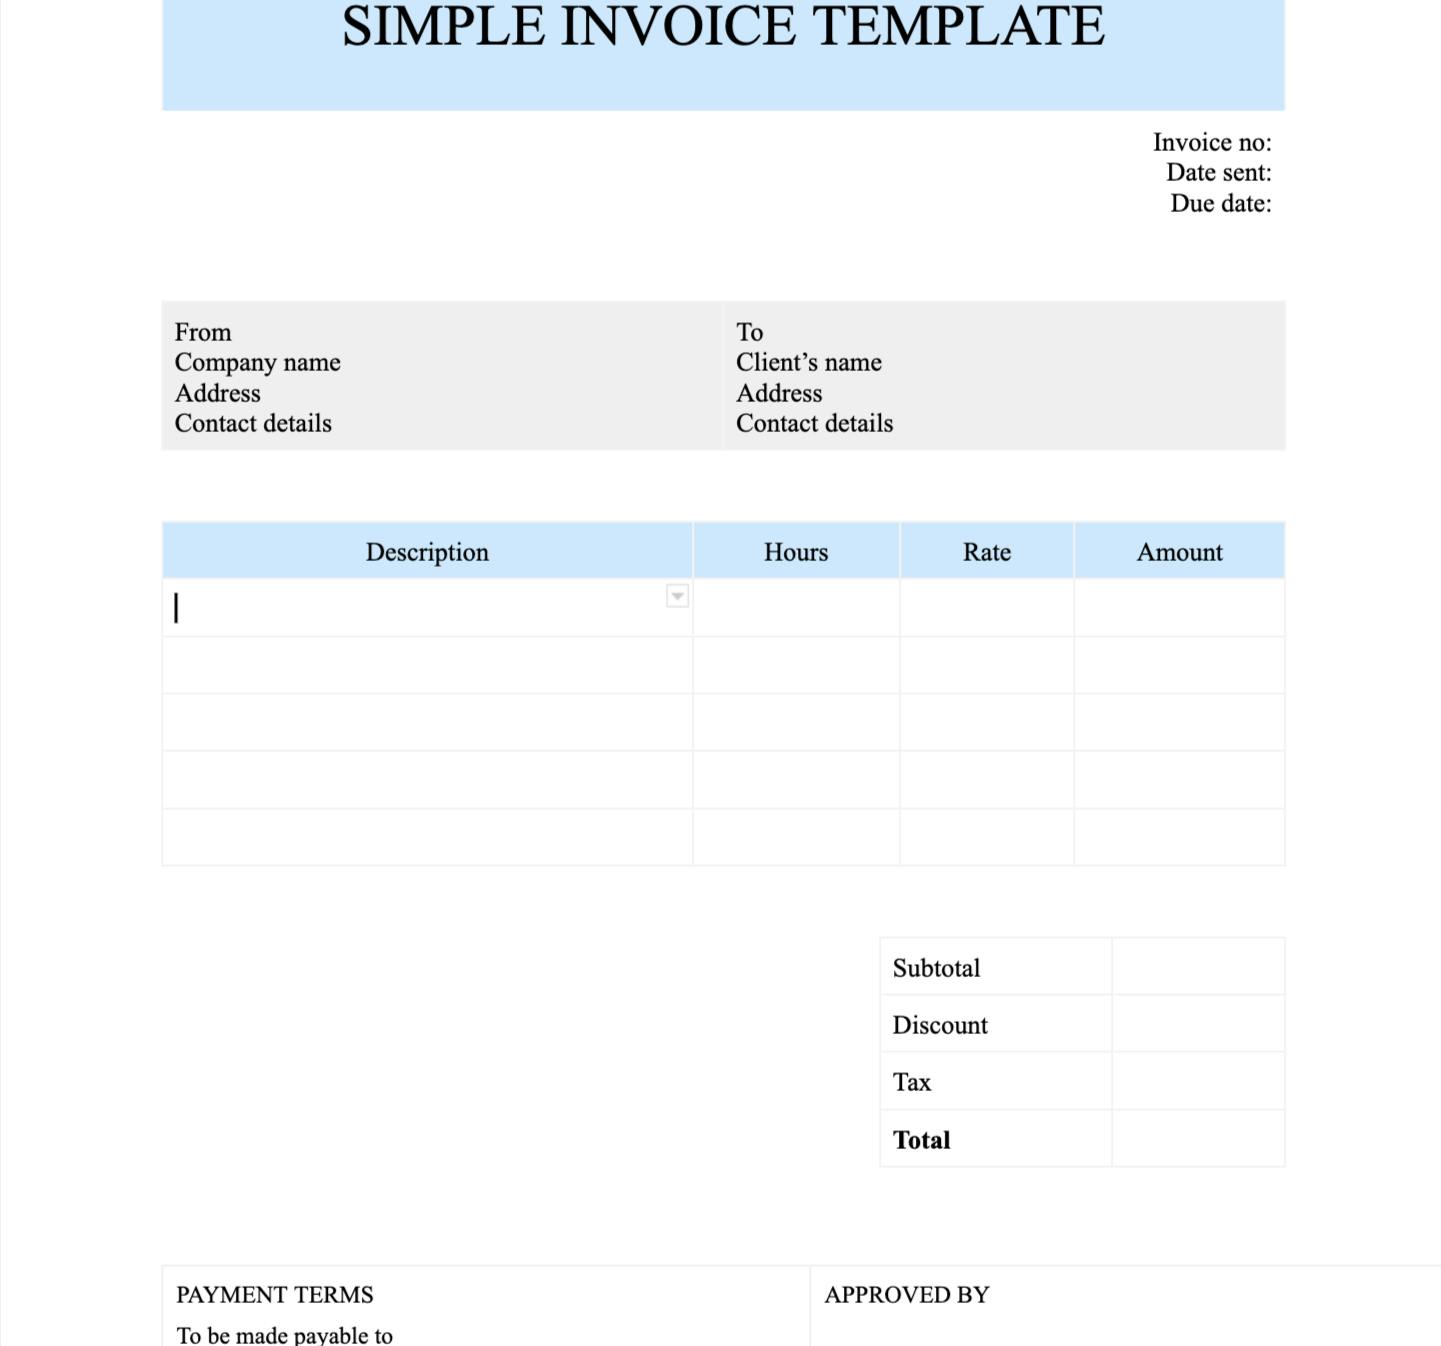 Simple invoice template in google docs 